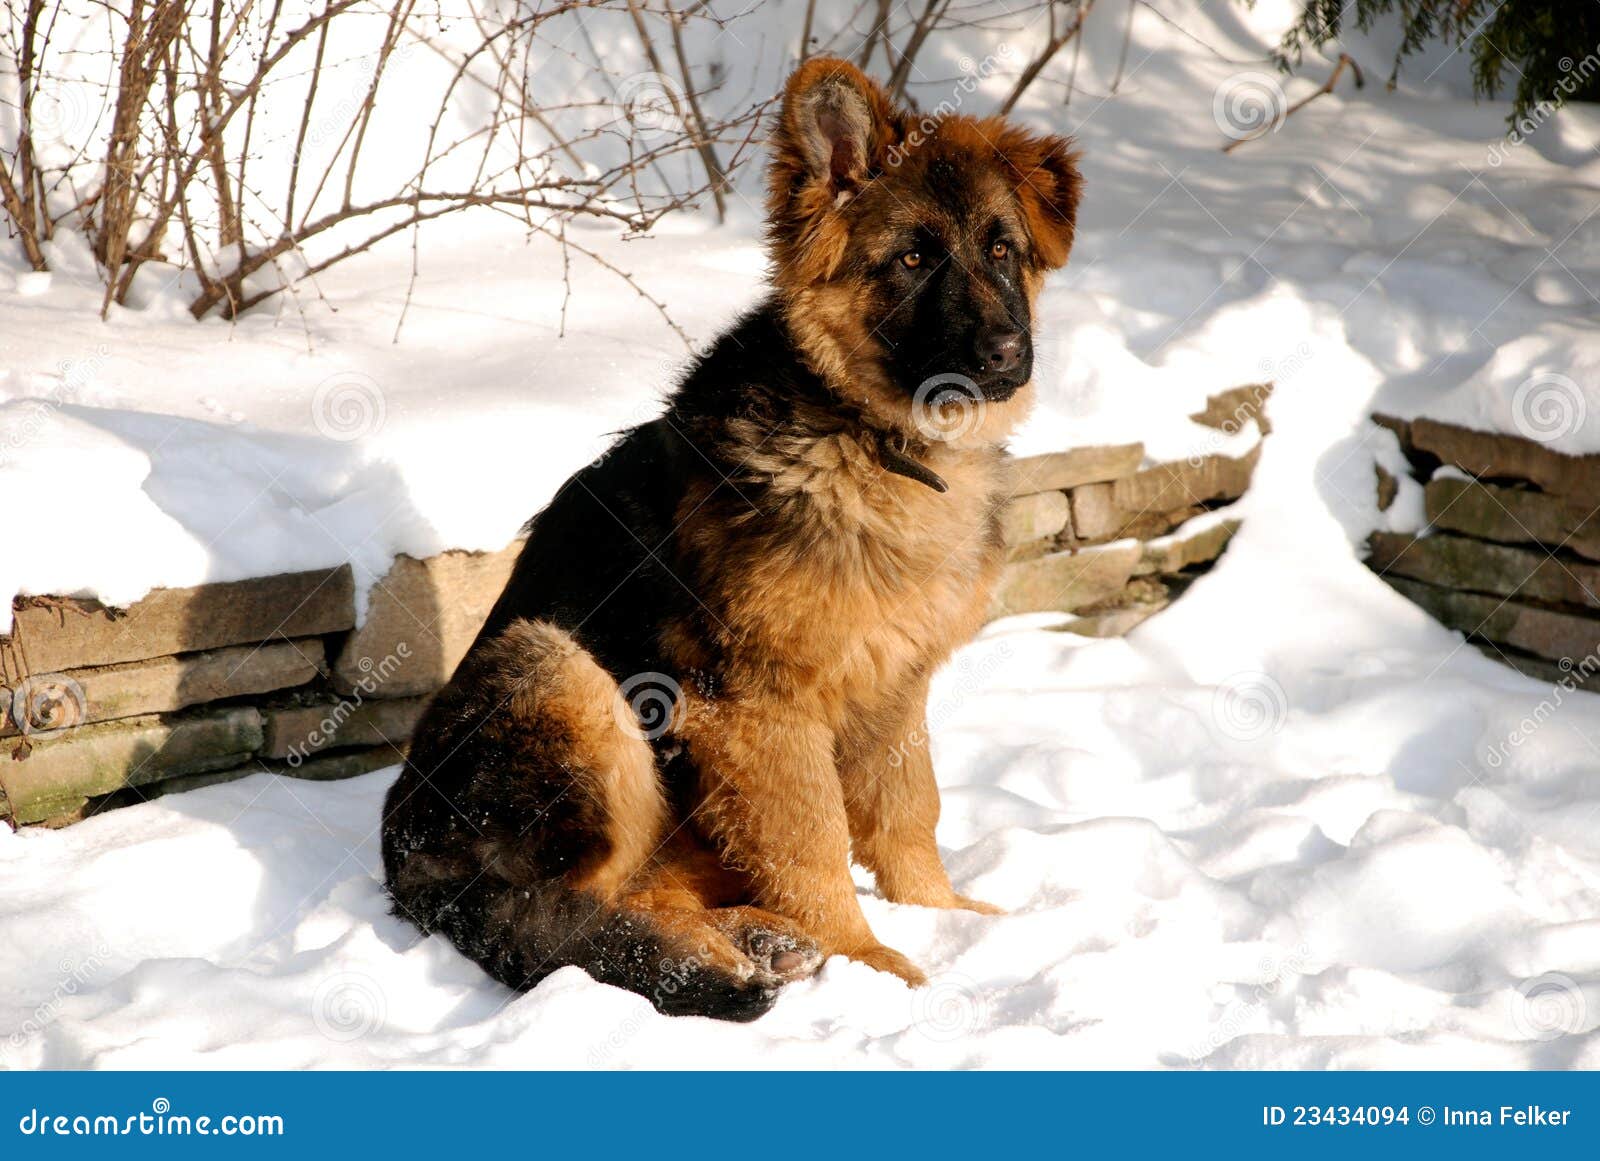 German Shepherd Puppy On The Snow Stock Photo - Image of purebred